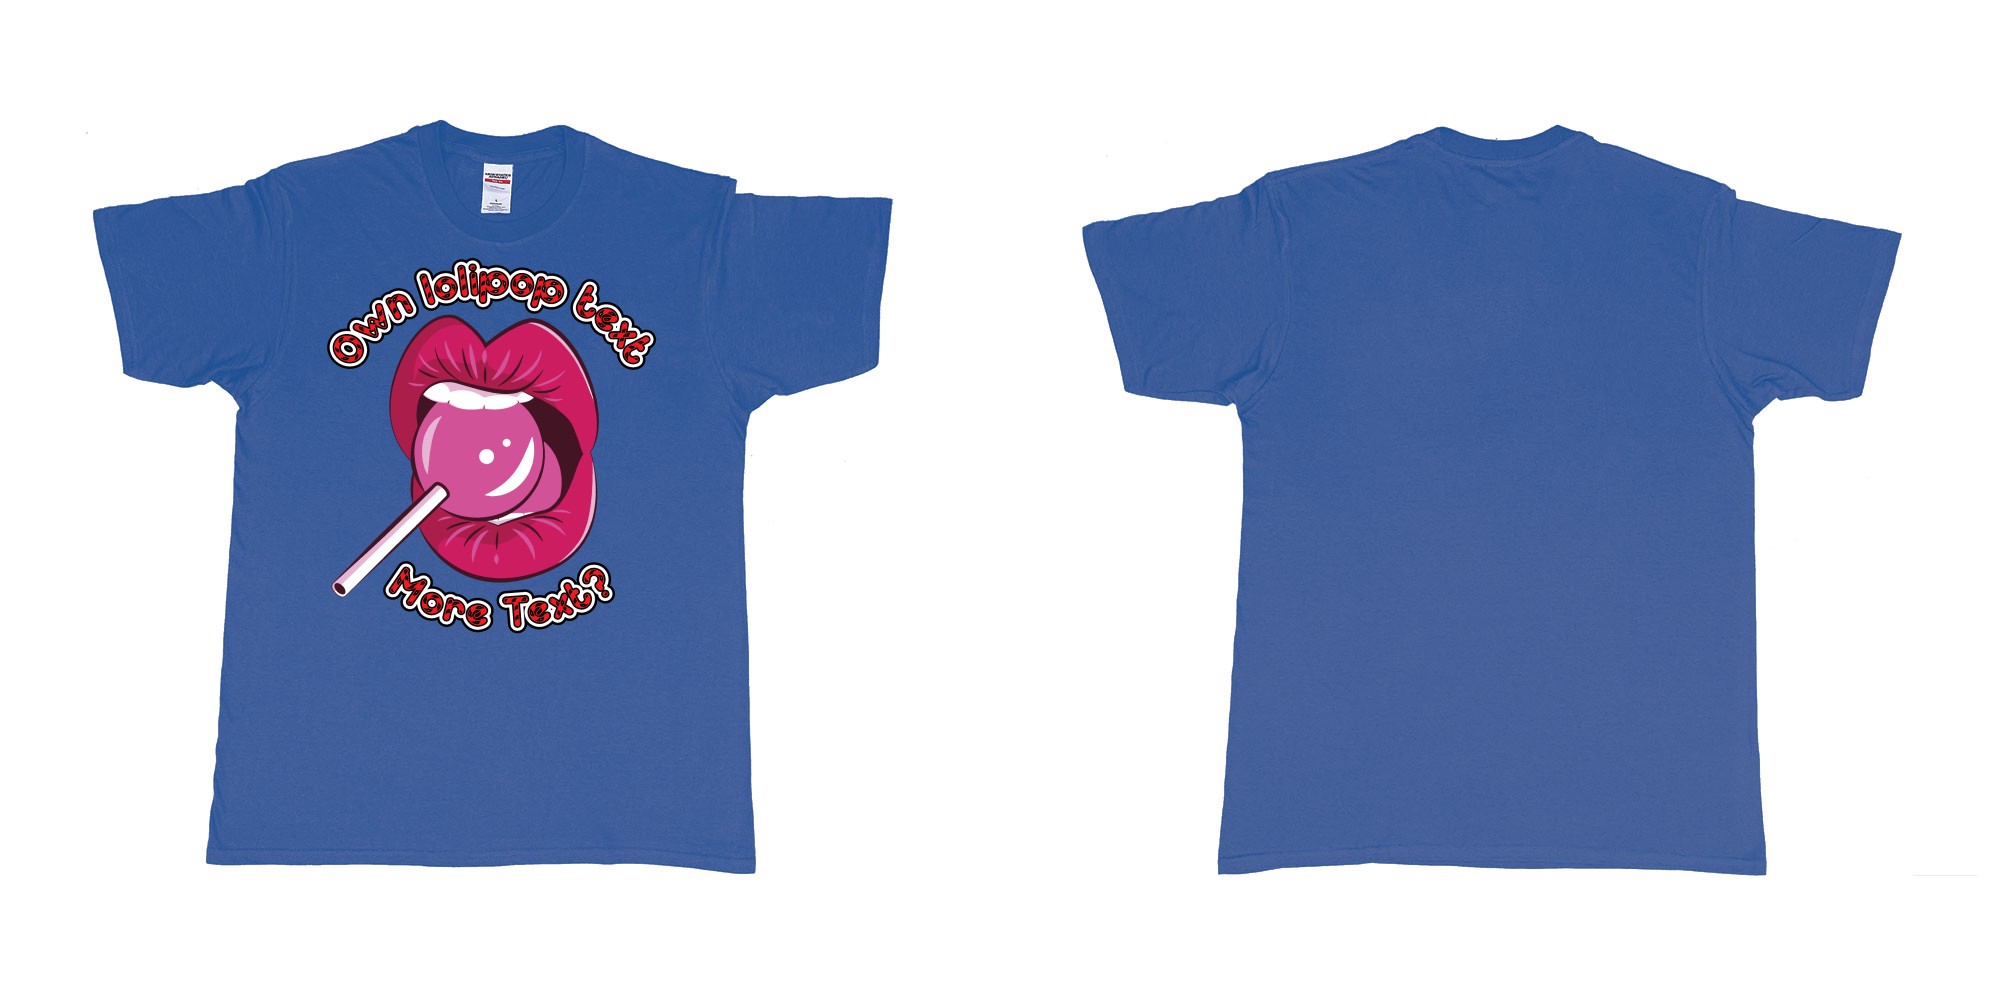 Custom tshirt design sexy lips licking lolipop own suger daddy text in fabric color royal-blue choice your own text made in Bali by The Pirate Way